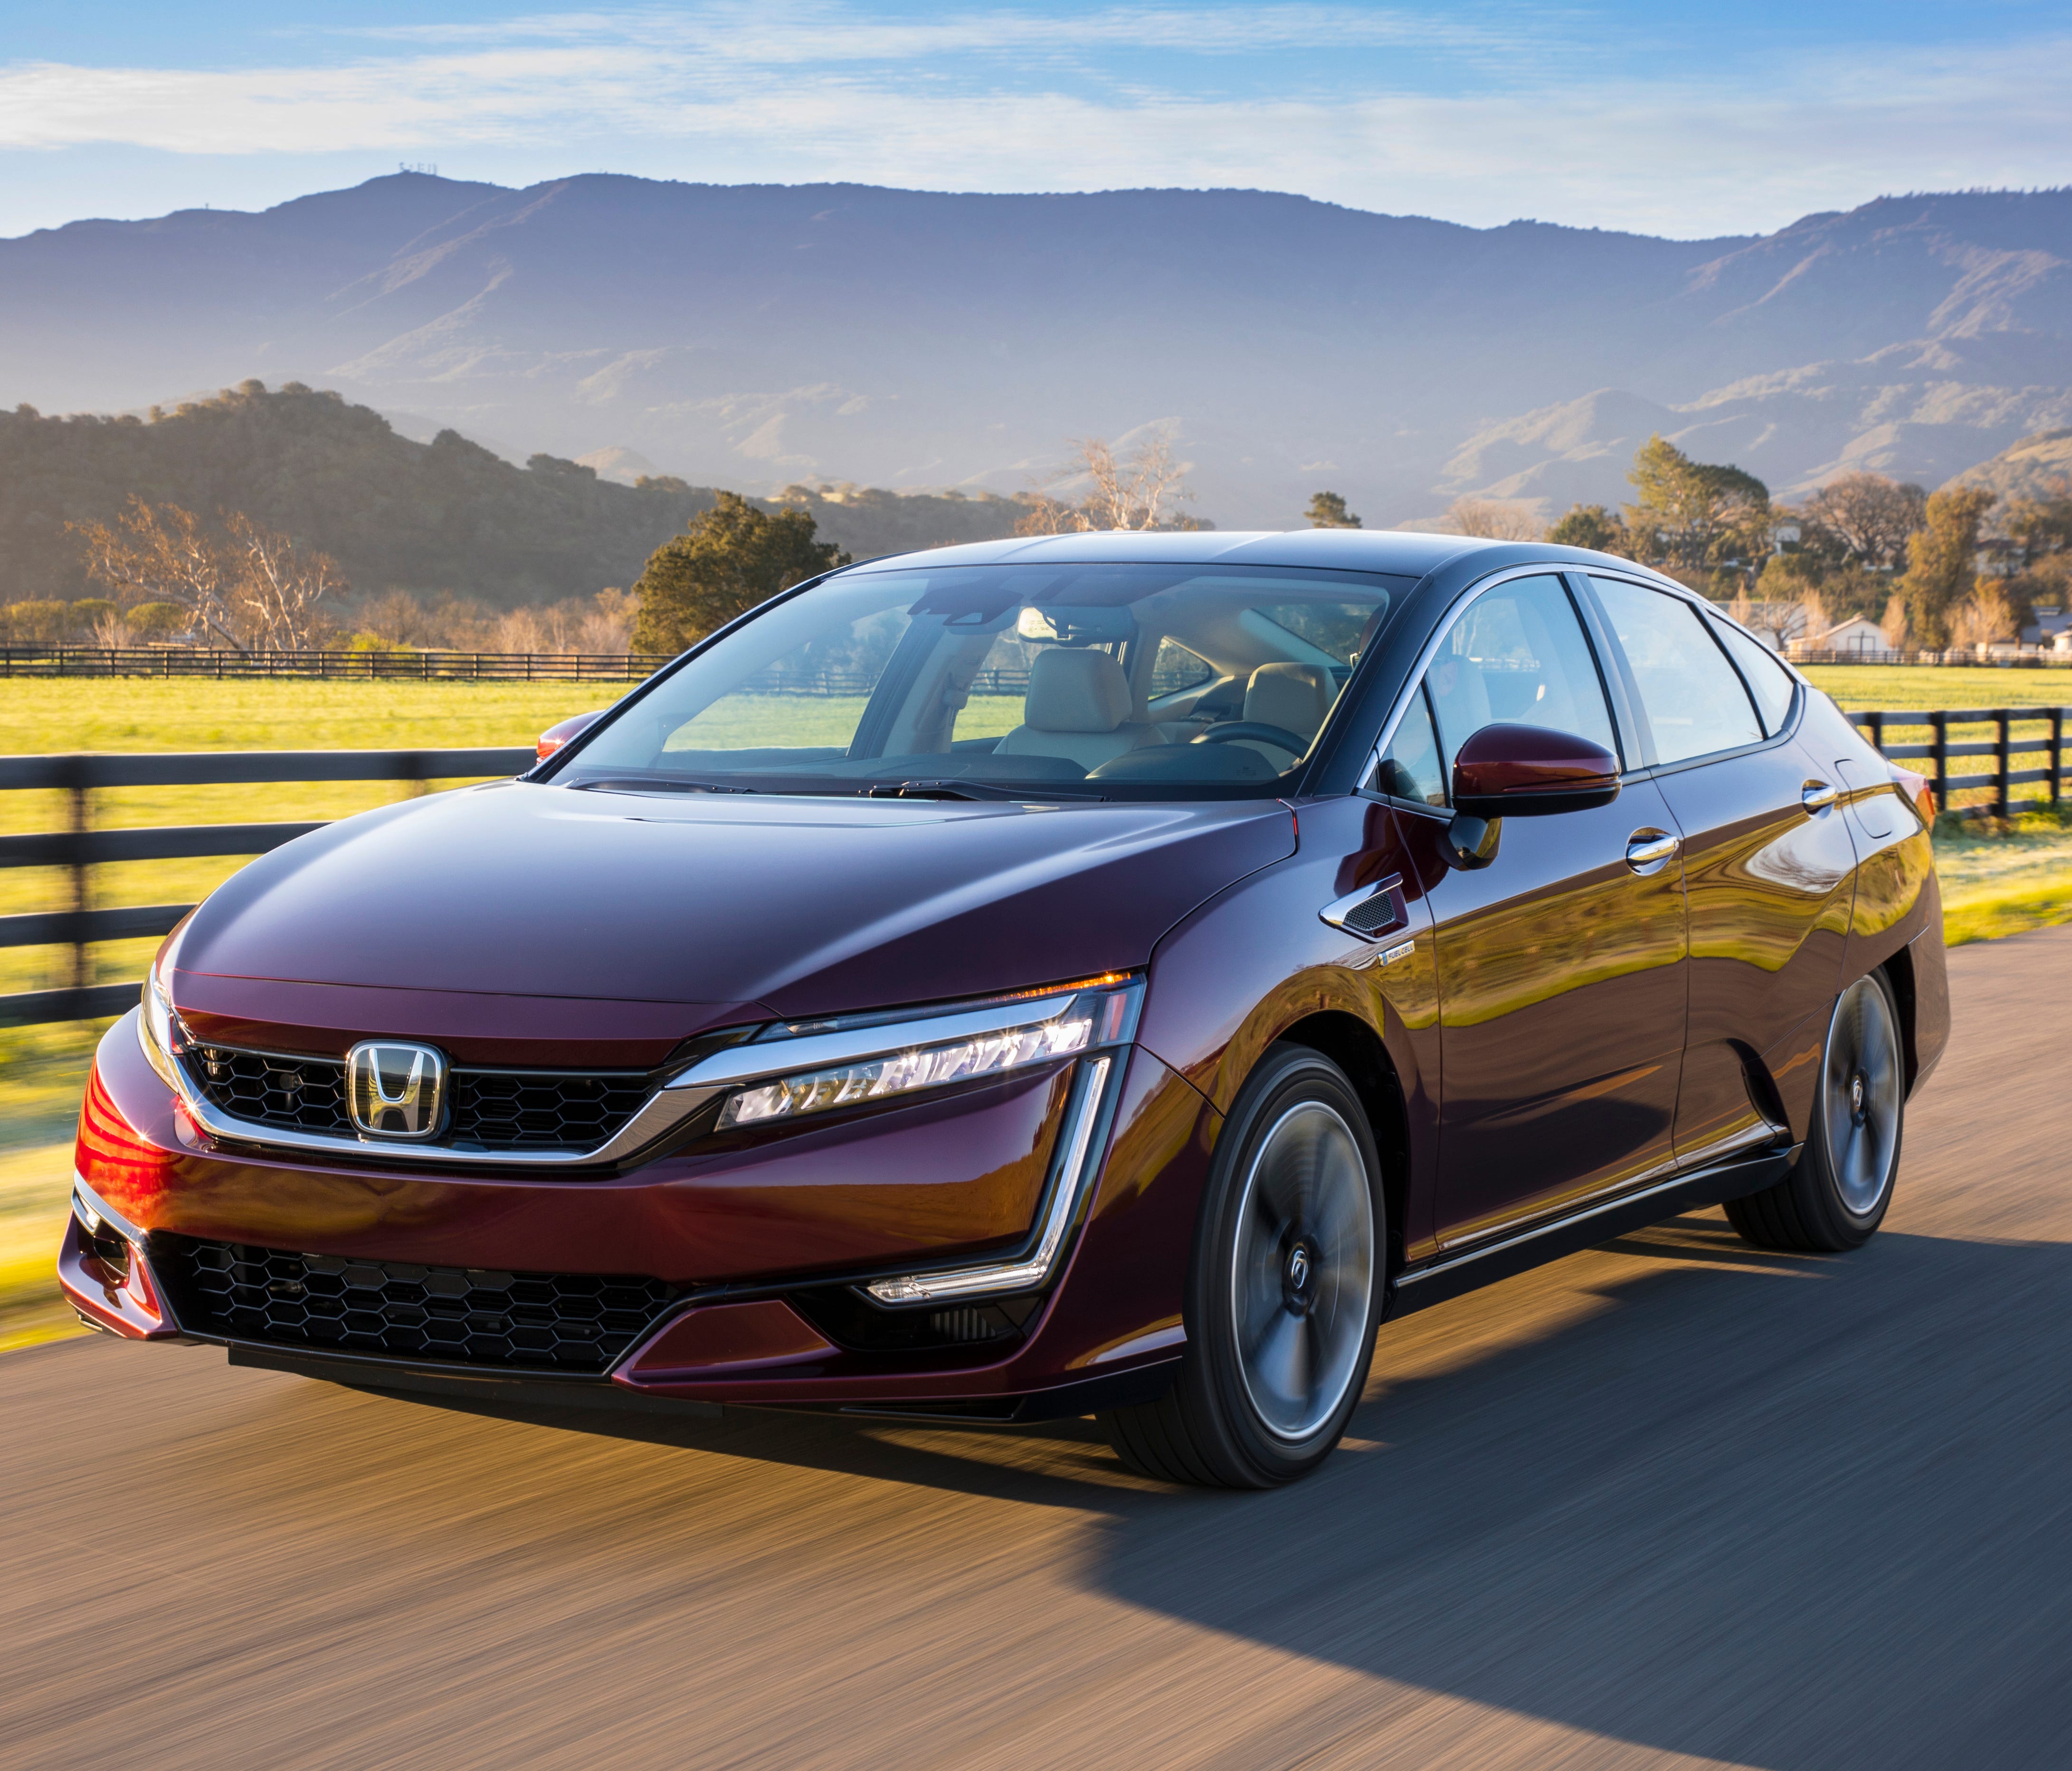 2017 Honda Clarity is the latest version of its fuel-cell car